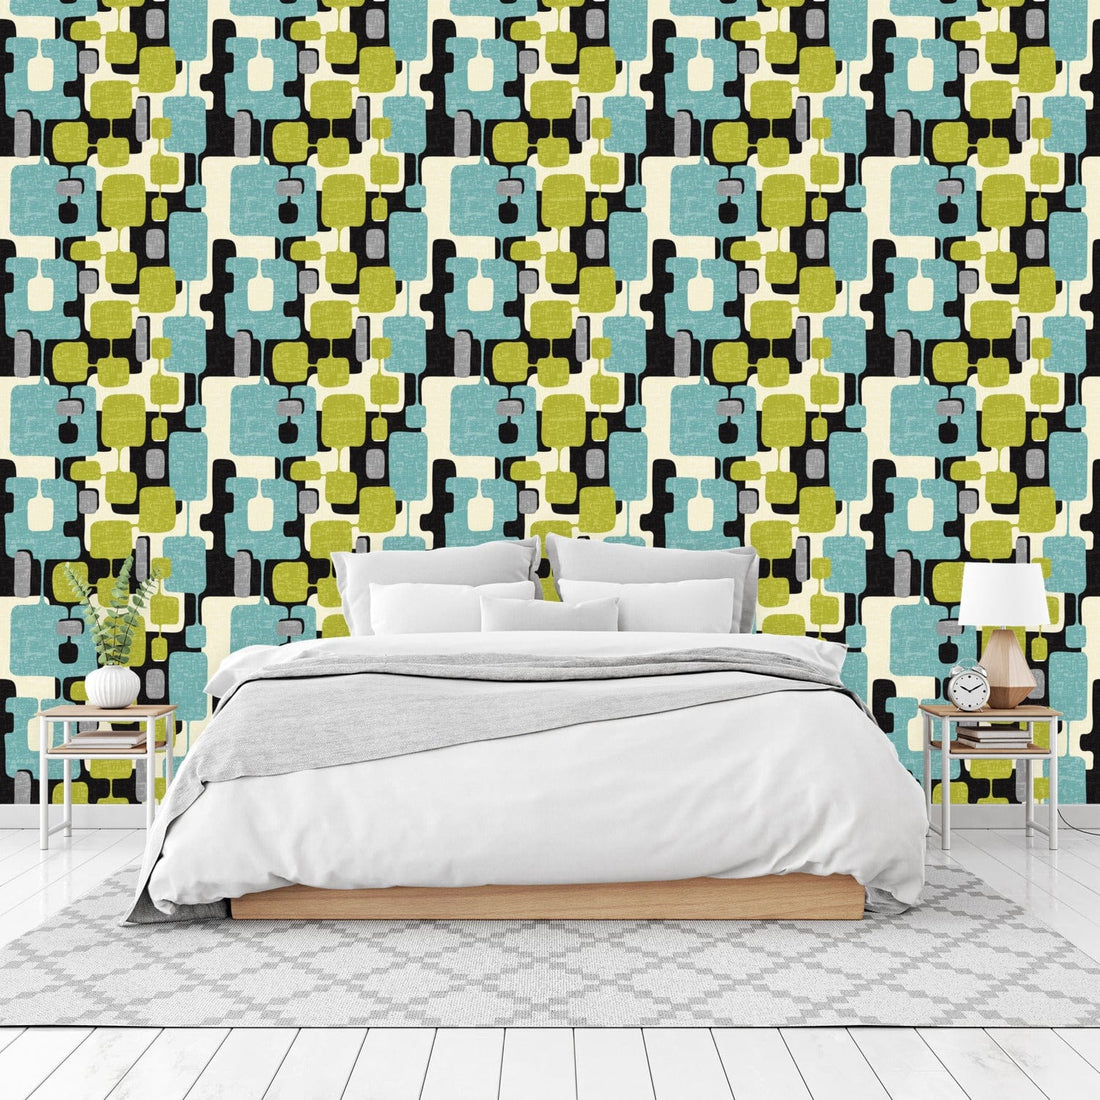 kate-mcenroe-nyc Mid Century Modern Abstract Peel and Stick Wallpaper Panels in Retro Teal, Lime Green, Gray, and Cream Hues Wallpaper Sample H12 x W20&quot; 75643